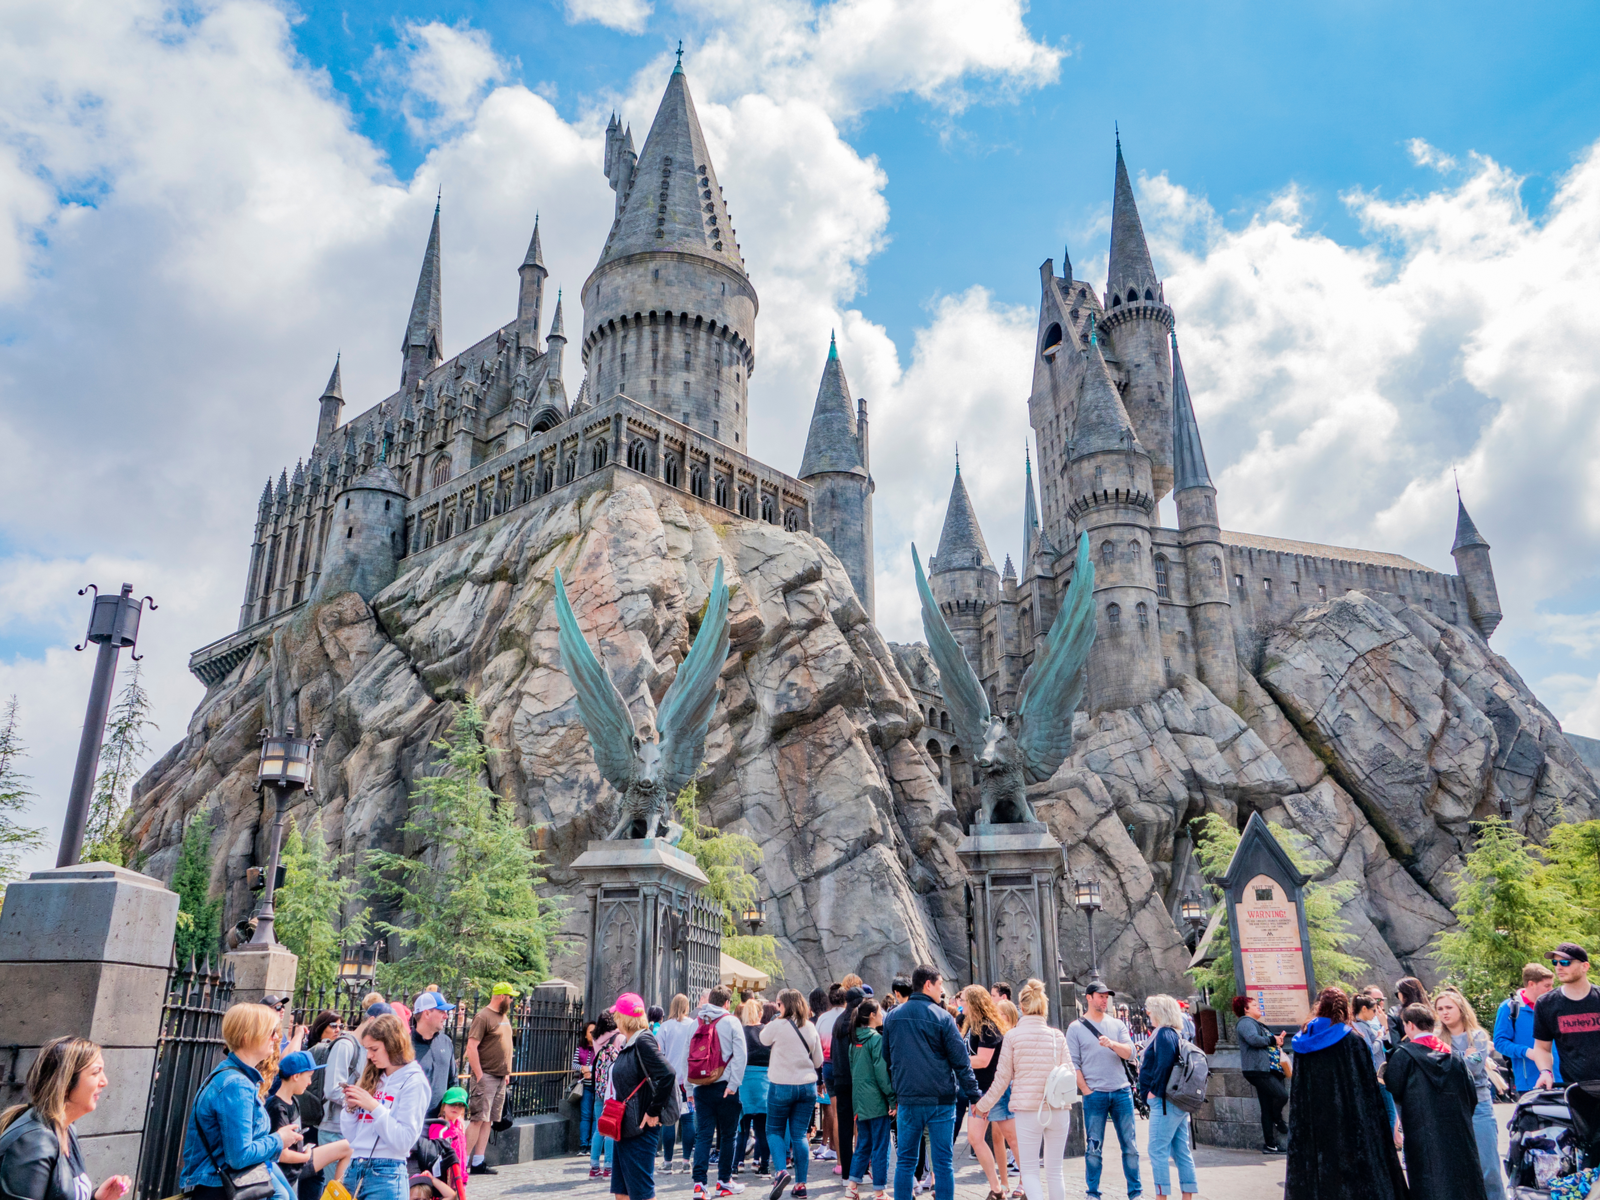 People crowding the entrance of Hogwarts Castle, a Harry Potter Castle theme, at Universal Studios in Hollywood, one of the best things to do in California